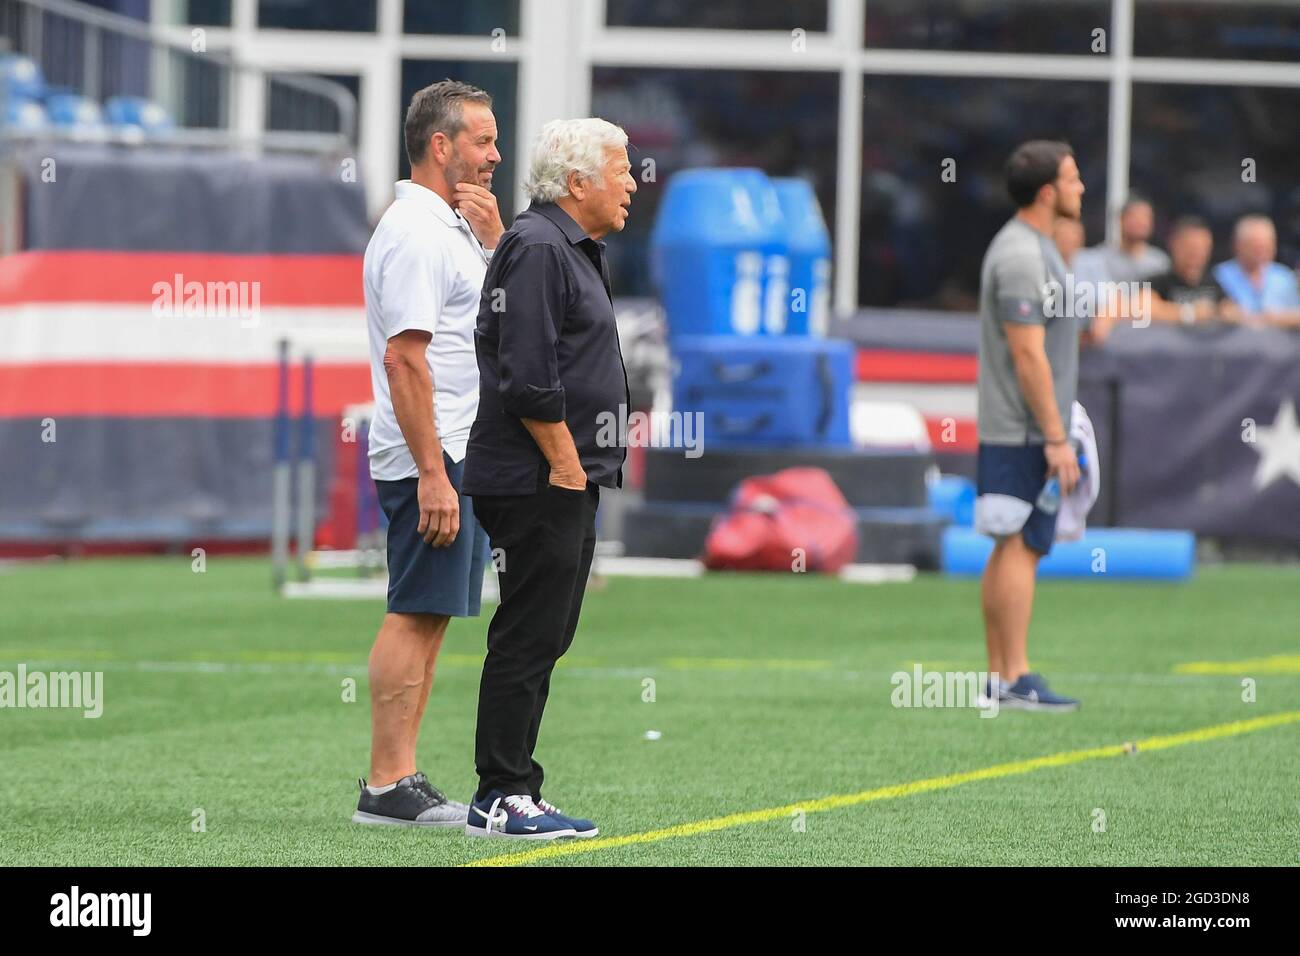 Tuesday, August 10, 2021: New England Patriots owner Robert Kraft (black shirt) watches practice at the New England Patriots training camp held at Gillette Stadium, in Foxborough, Massachusetts. Eric Canha/CSM Stock Photo